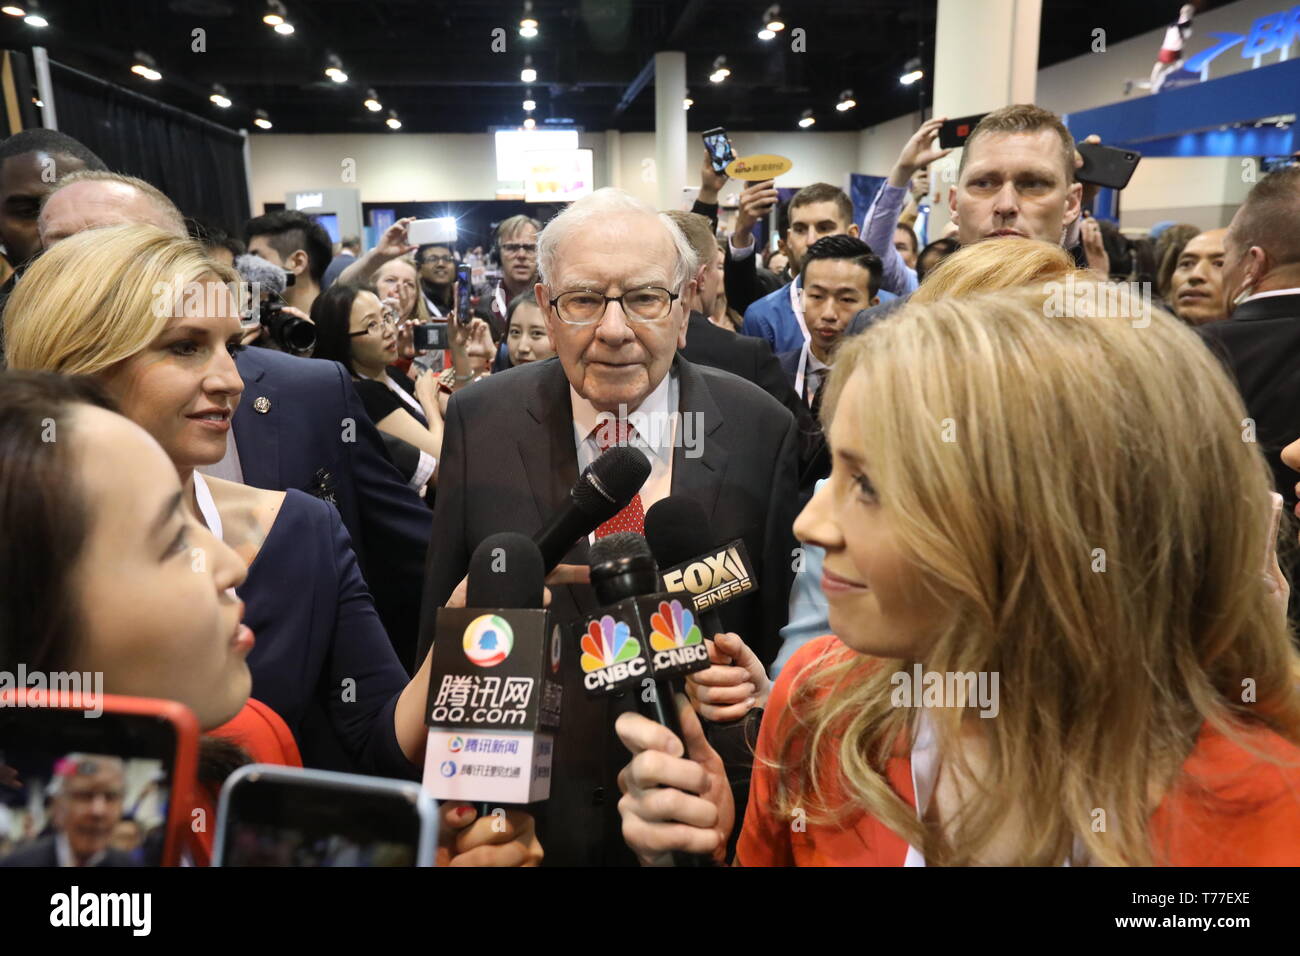 Omaha, USA. 4th May, 2019. Warren Buffett (C), chairman and CEO of Berkshire Hathaway, speaks to reporters during the company's annual shareholders meeting in Omaha, the United States on May 4, 2019. U.S. legendary investor Warren Buffett said on Saturday it is not 'inconceivable' for his Berkshire Hathaway Inc. to further partner with 3G Capital, which manages packaged food giant Kraft Heinz that has faced federal investigation into alleged procurement mishandlings. Credit: Yang Chenglin/Xinhua/Alamy Live News Stock Photo